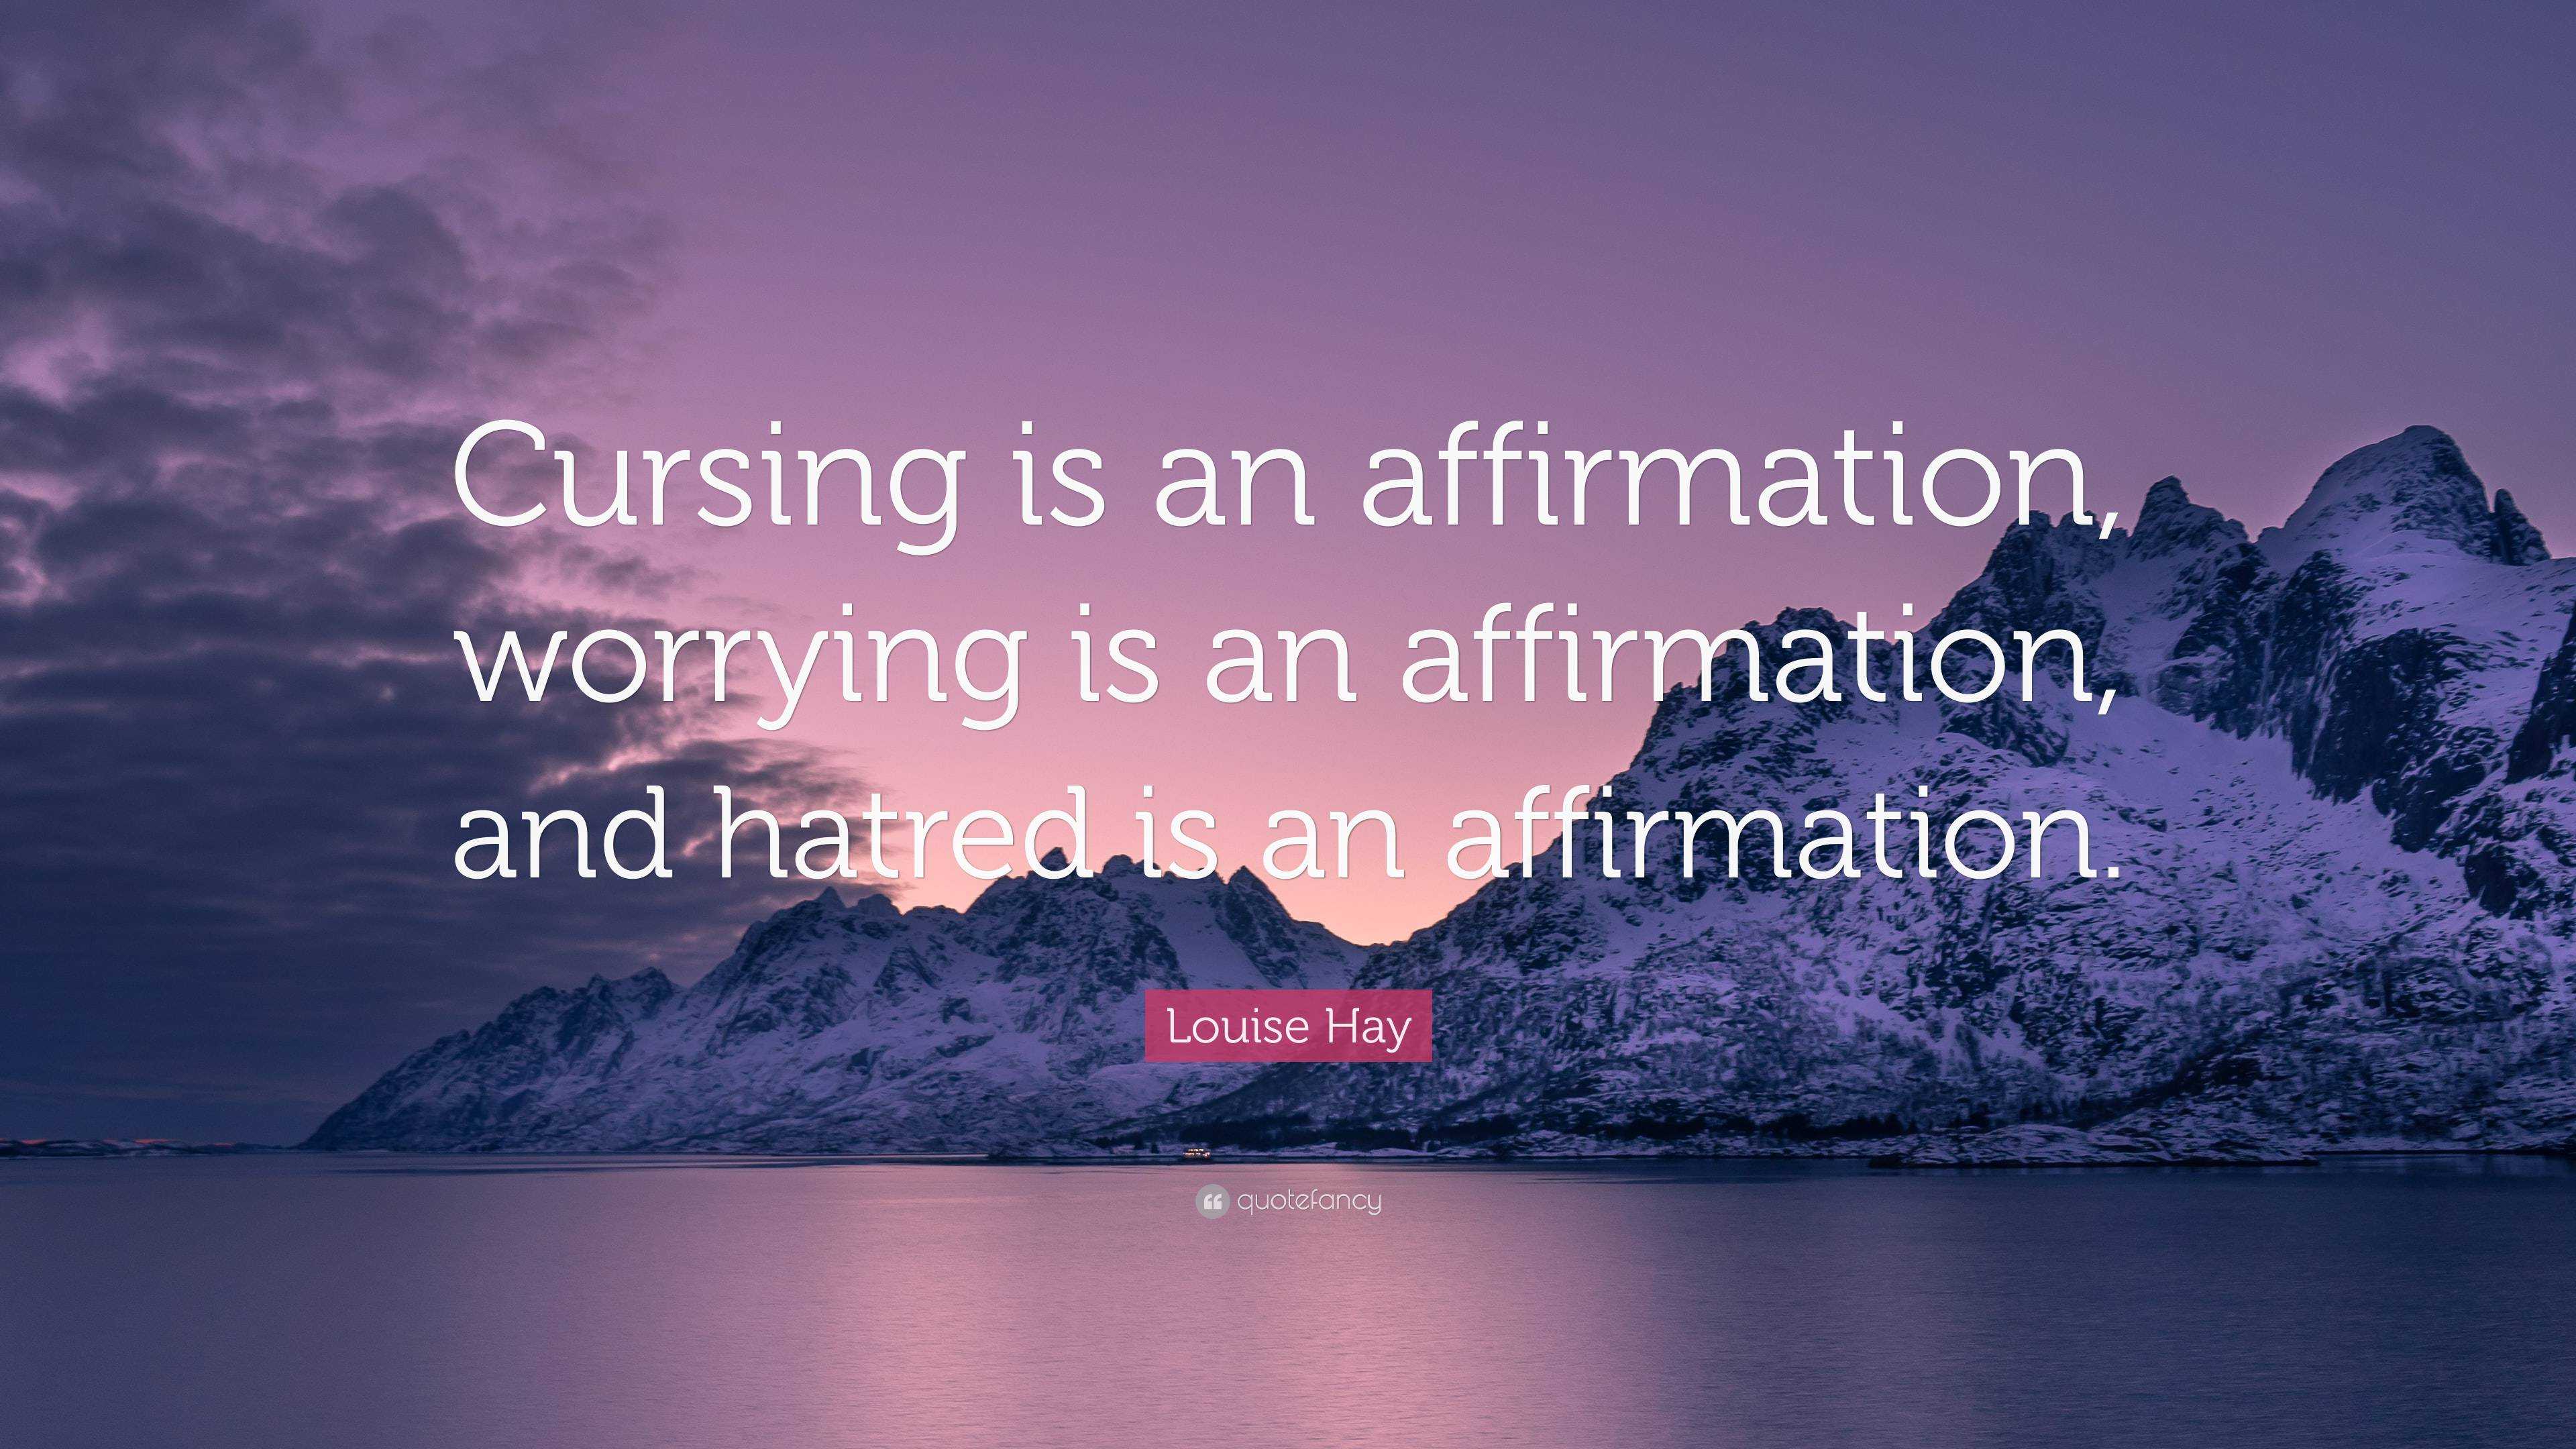 Louise Hay Quote: “Cursing is an affirmation, worrying is an affirmation,  and hatred is an affirmation.”